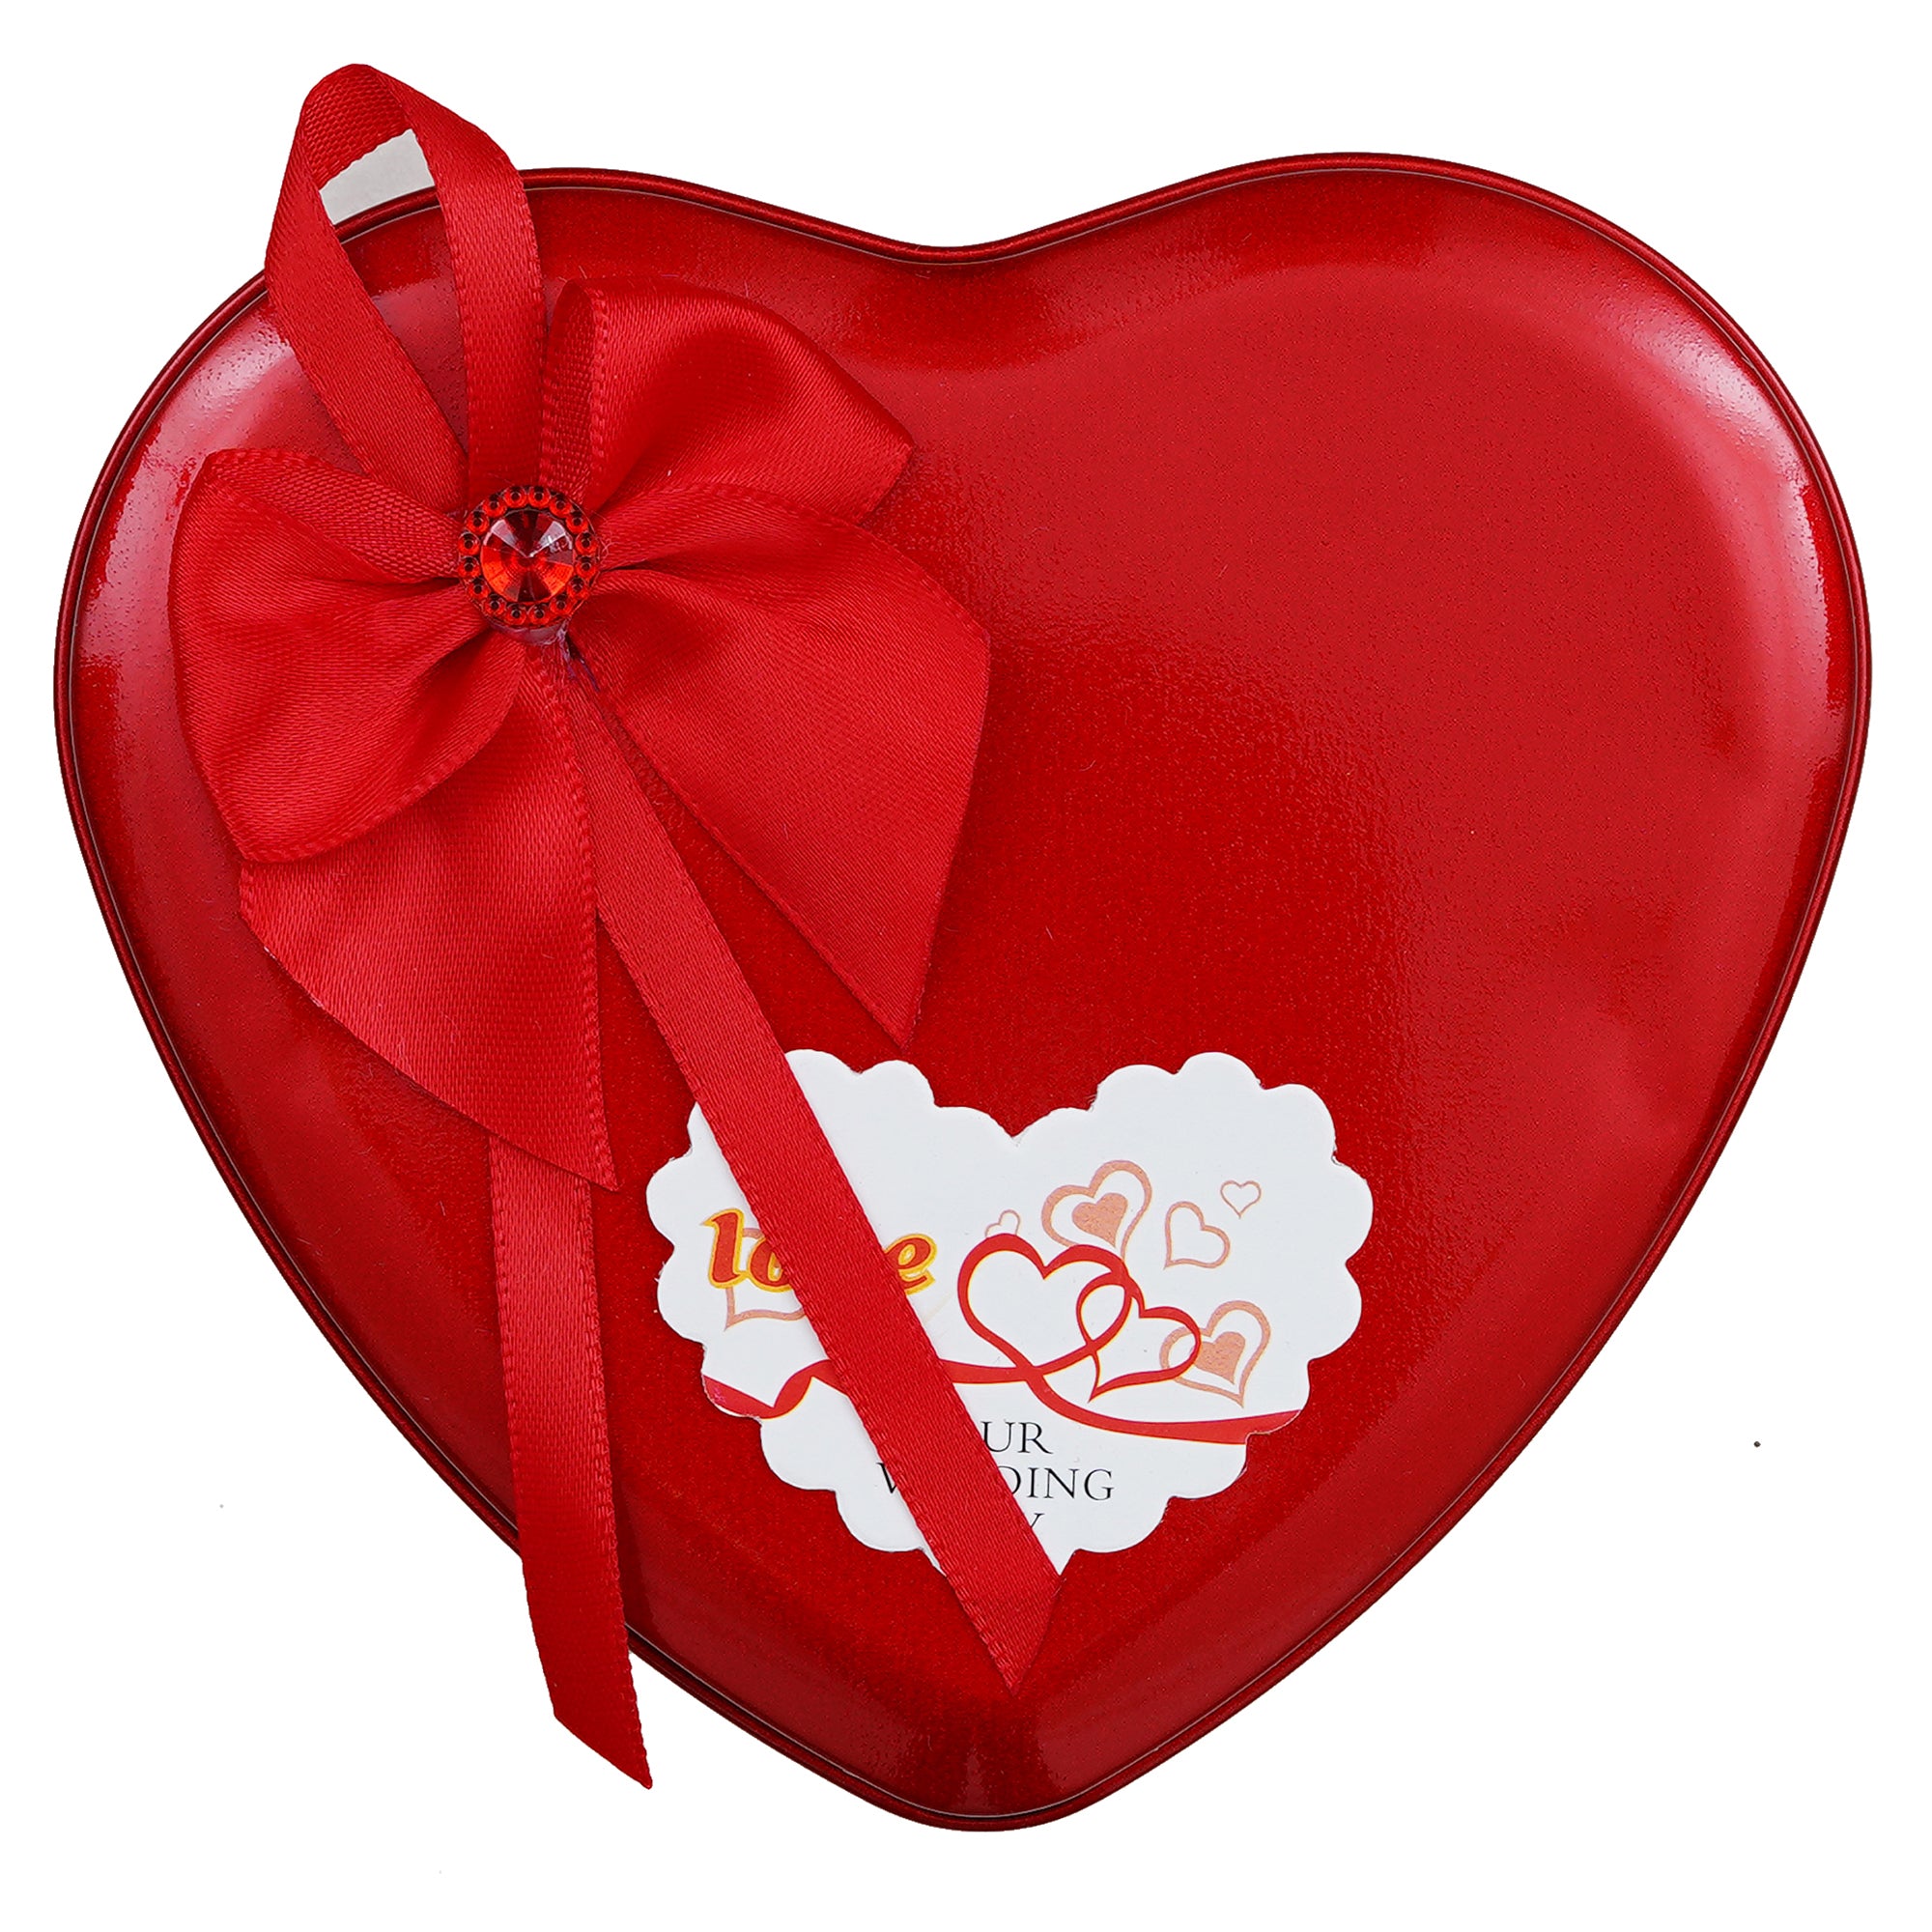 Red Roses and Teddy Bear Valentine's Heart Shaped Gift Box 6